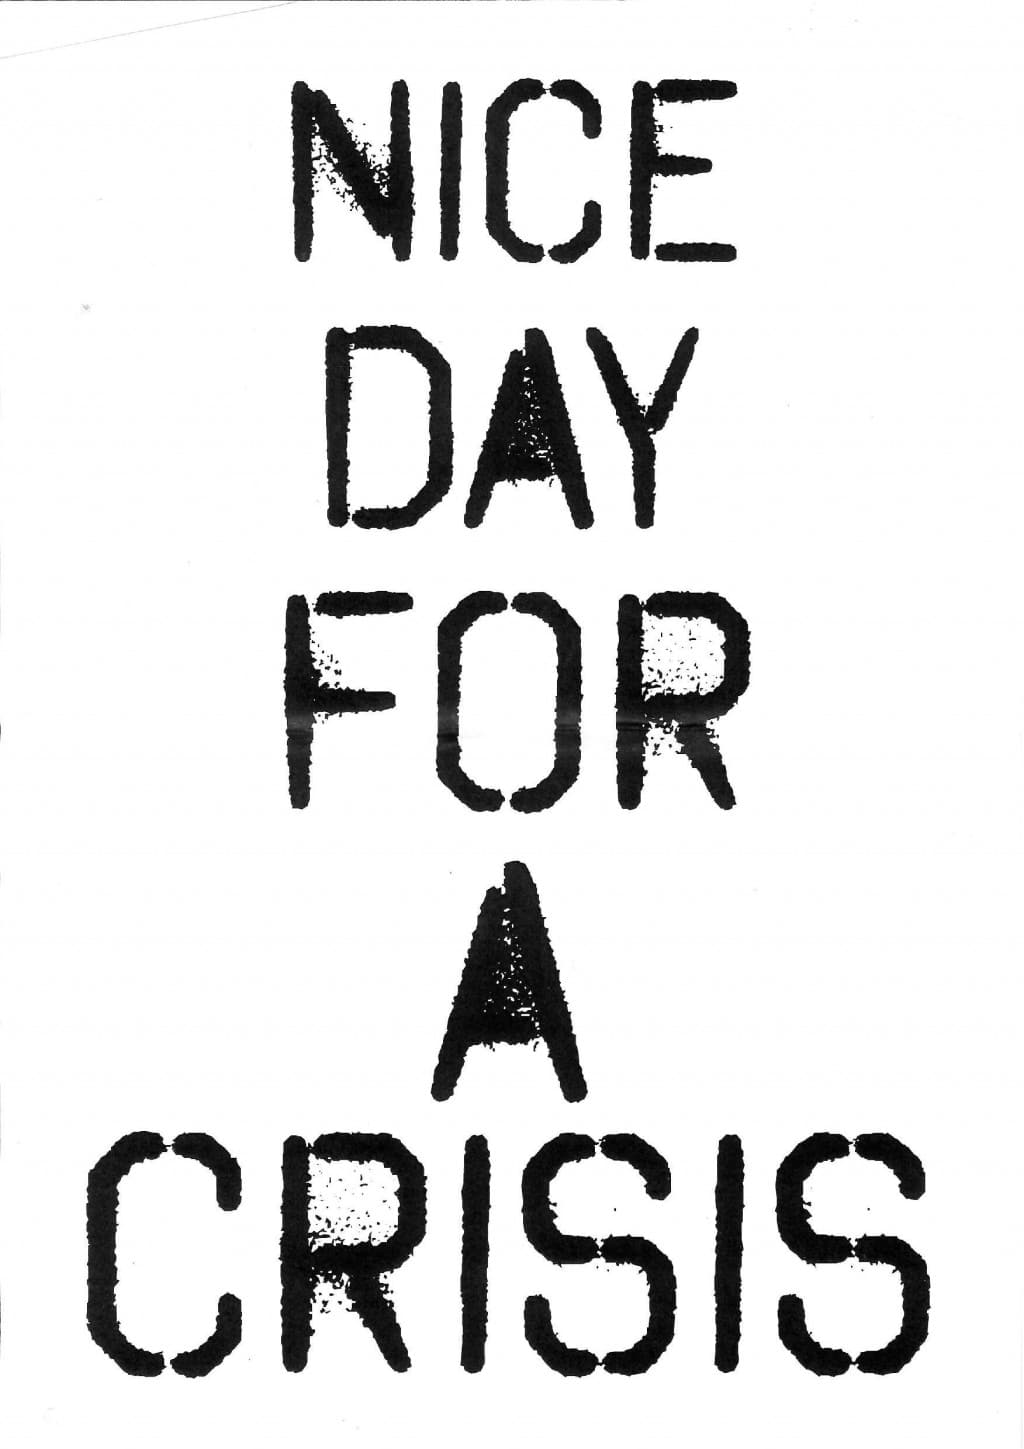 Fly poster for Dead Dog in a Suitcase. Text based design. Black lettering on a white background. Five lines of text with the words' Nice day for a crisis'. Written in bold, capital letters throughout. The ink is slightly smudged in places and uneven, giving it a hand printed feel. Segment style font.